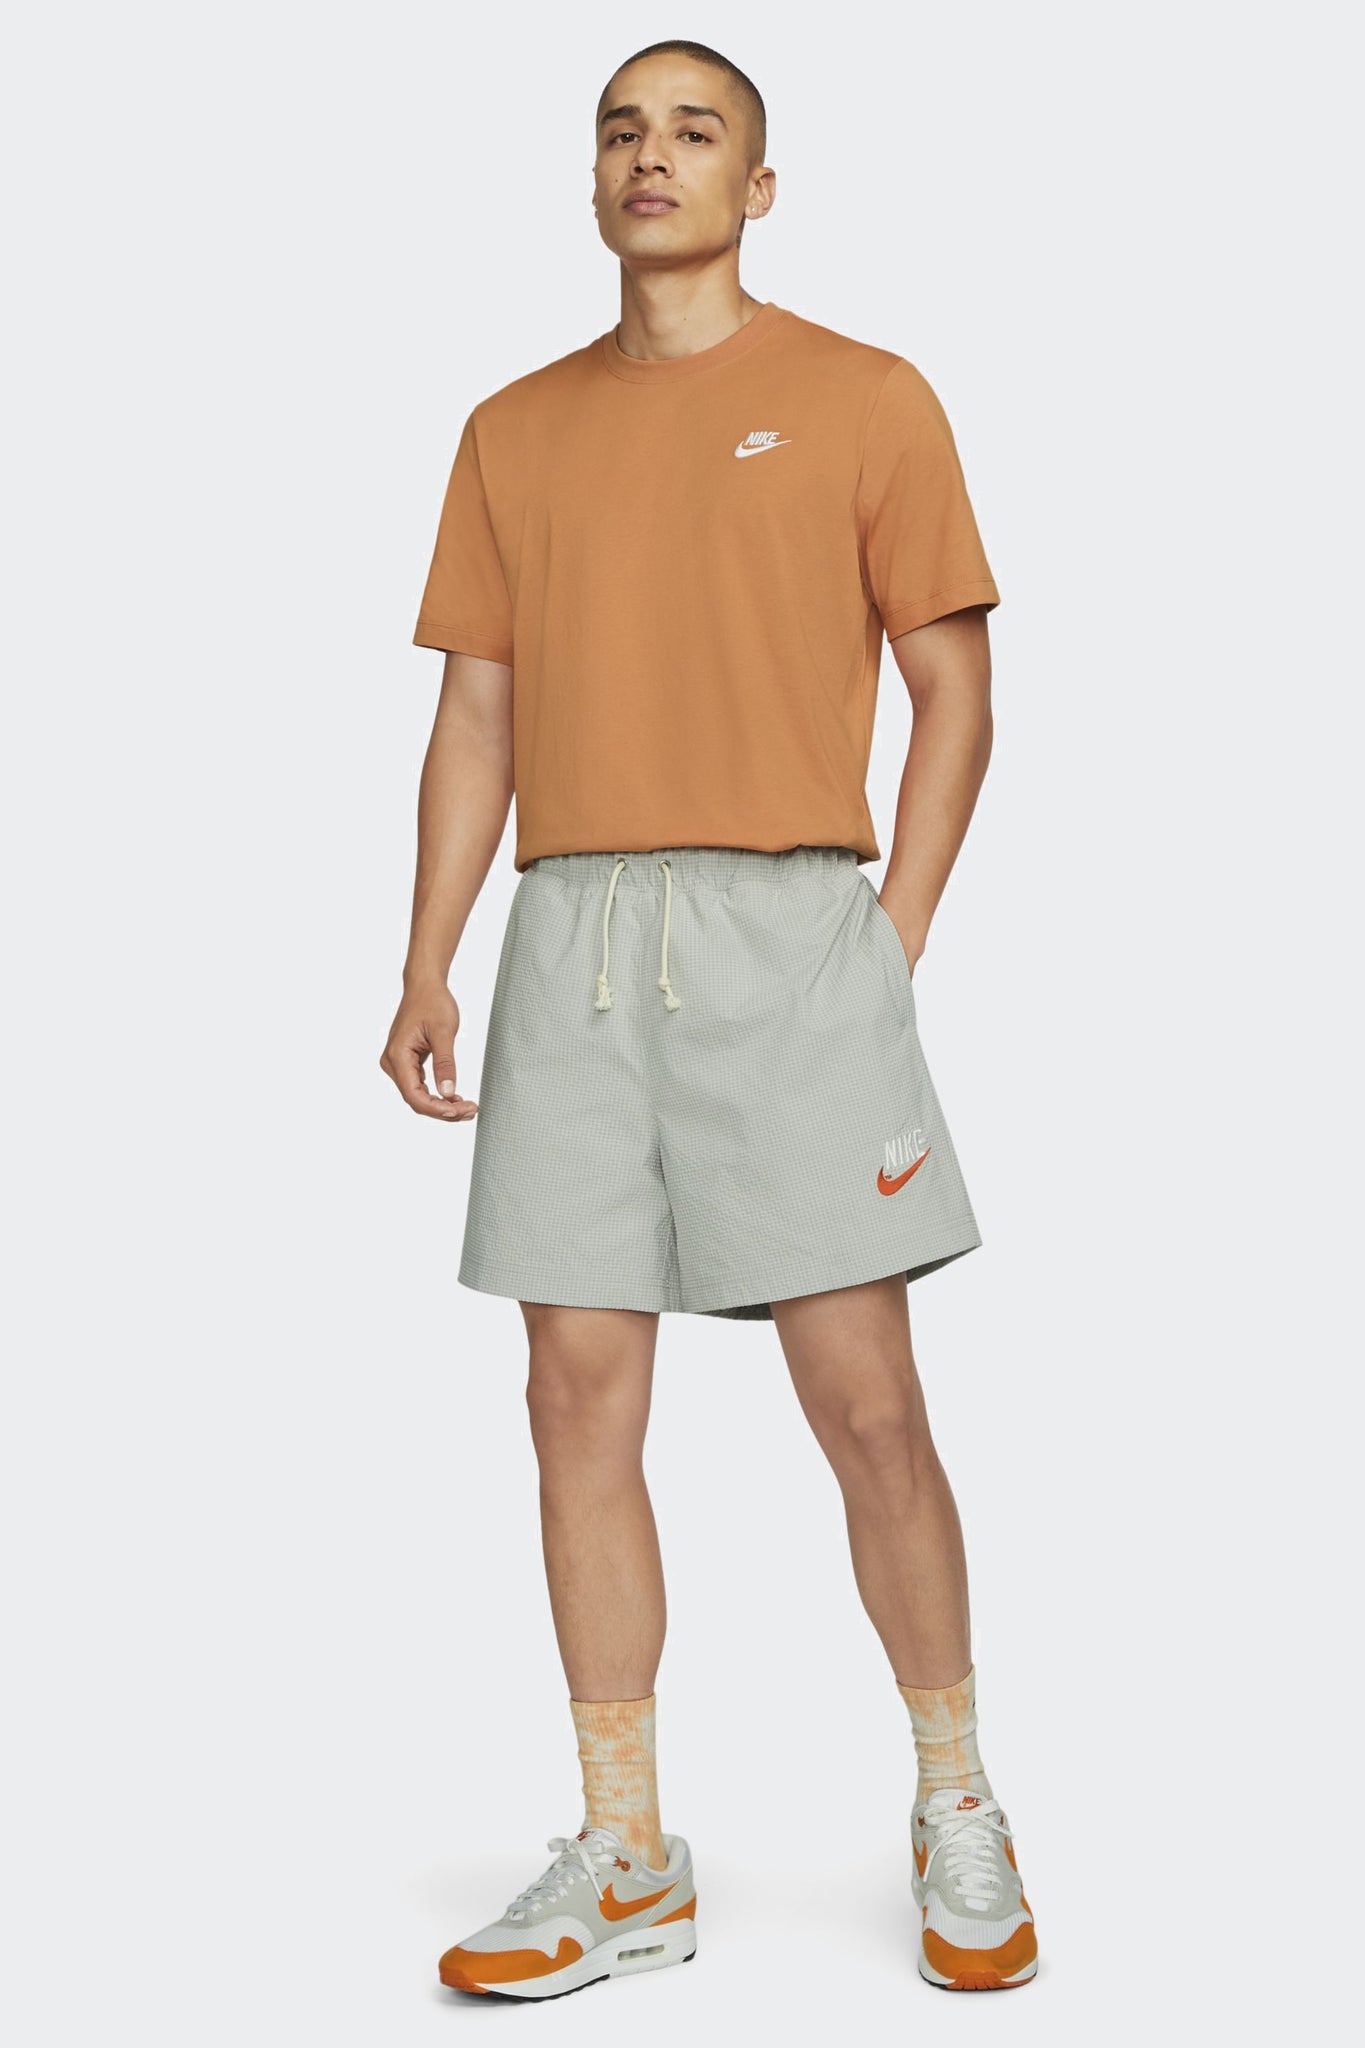 NSW WOVEN SHORTS